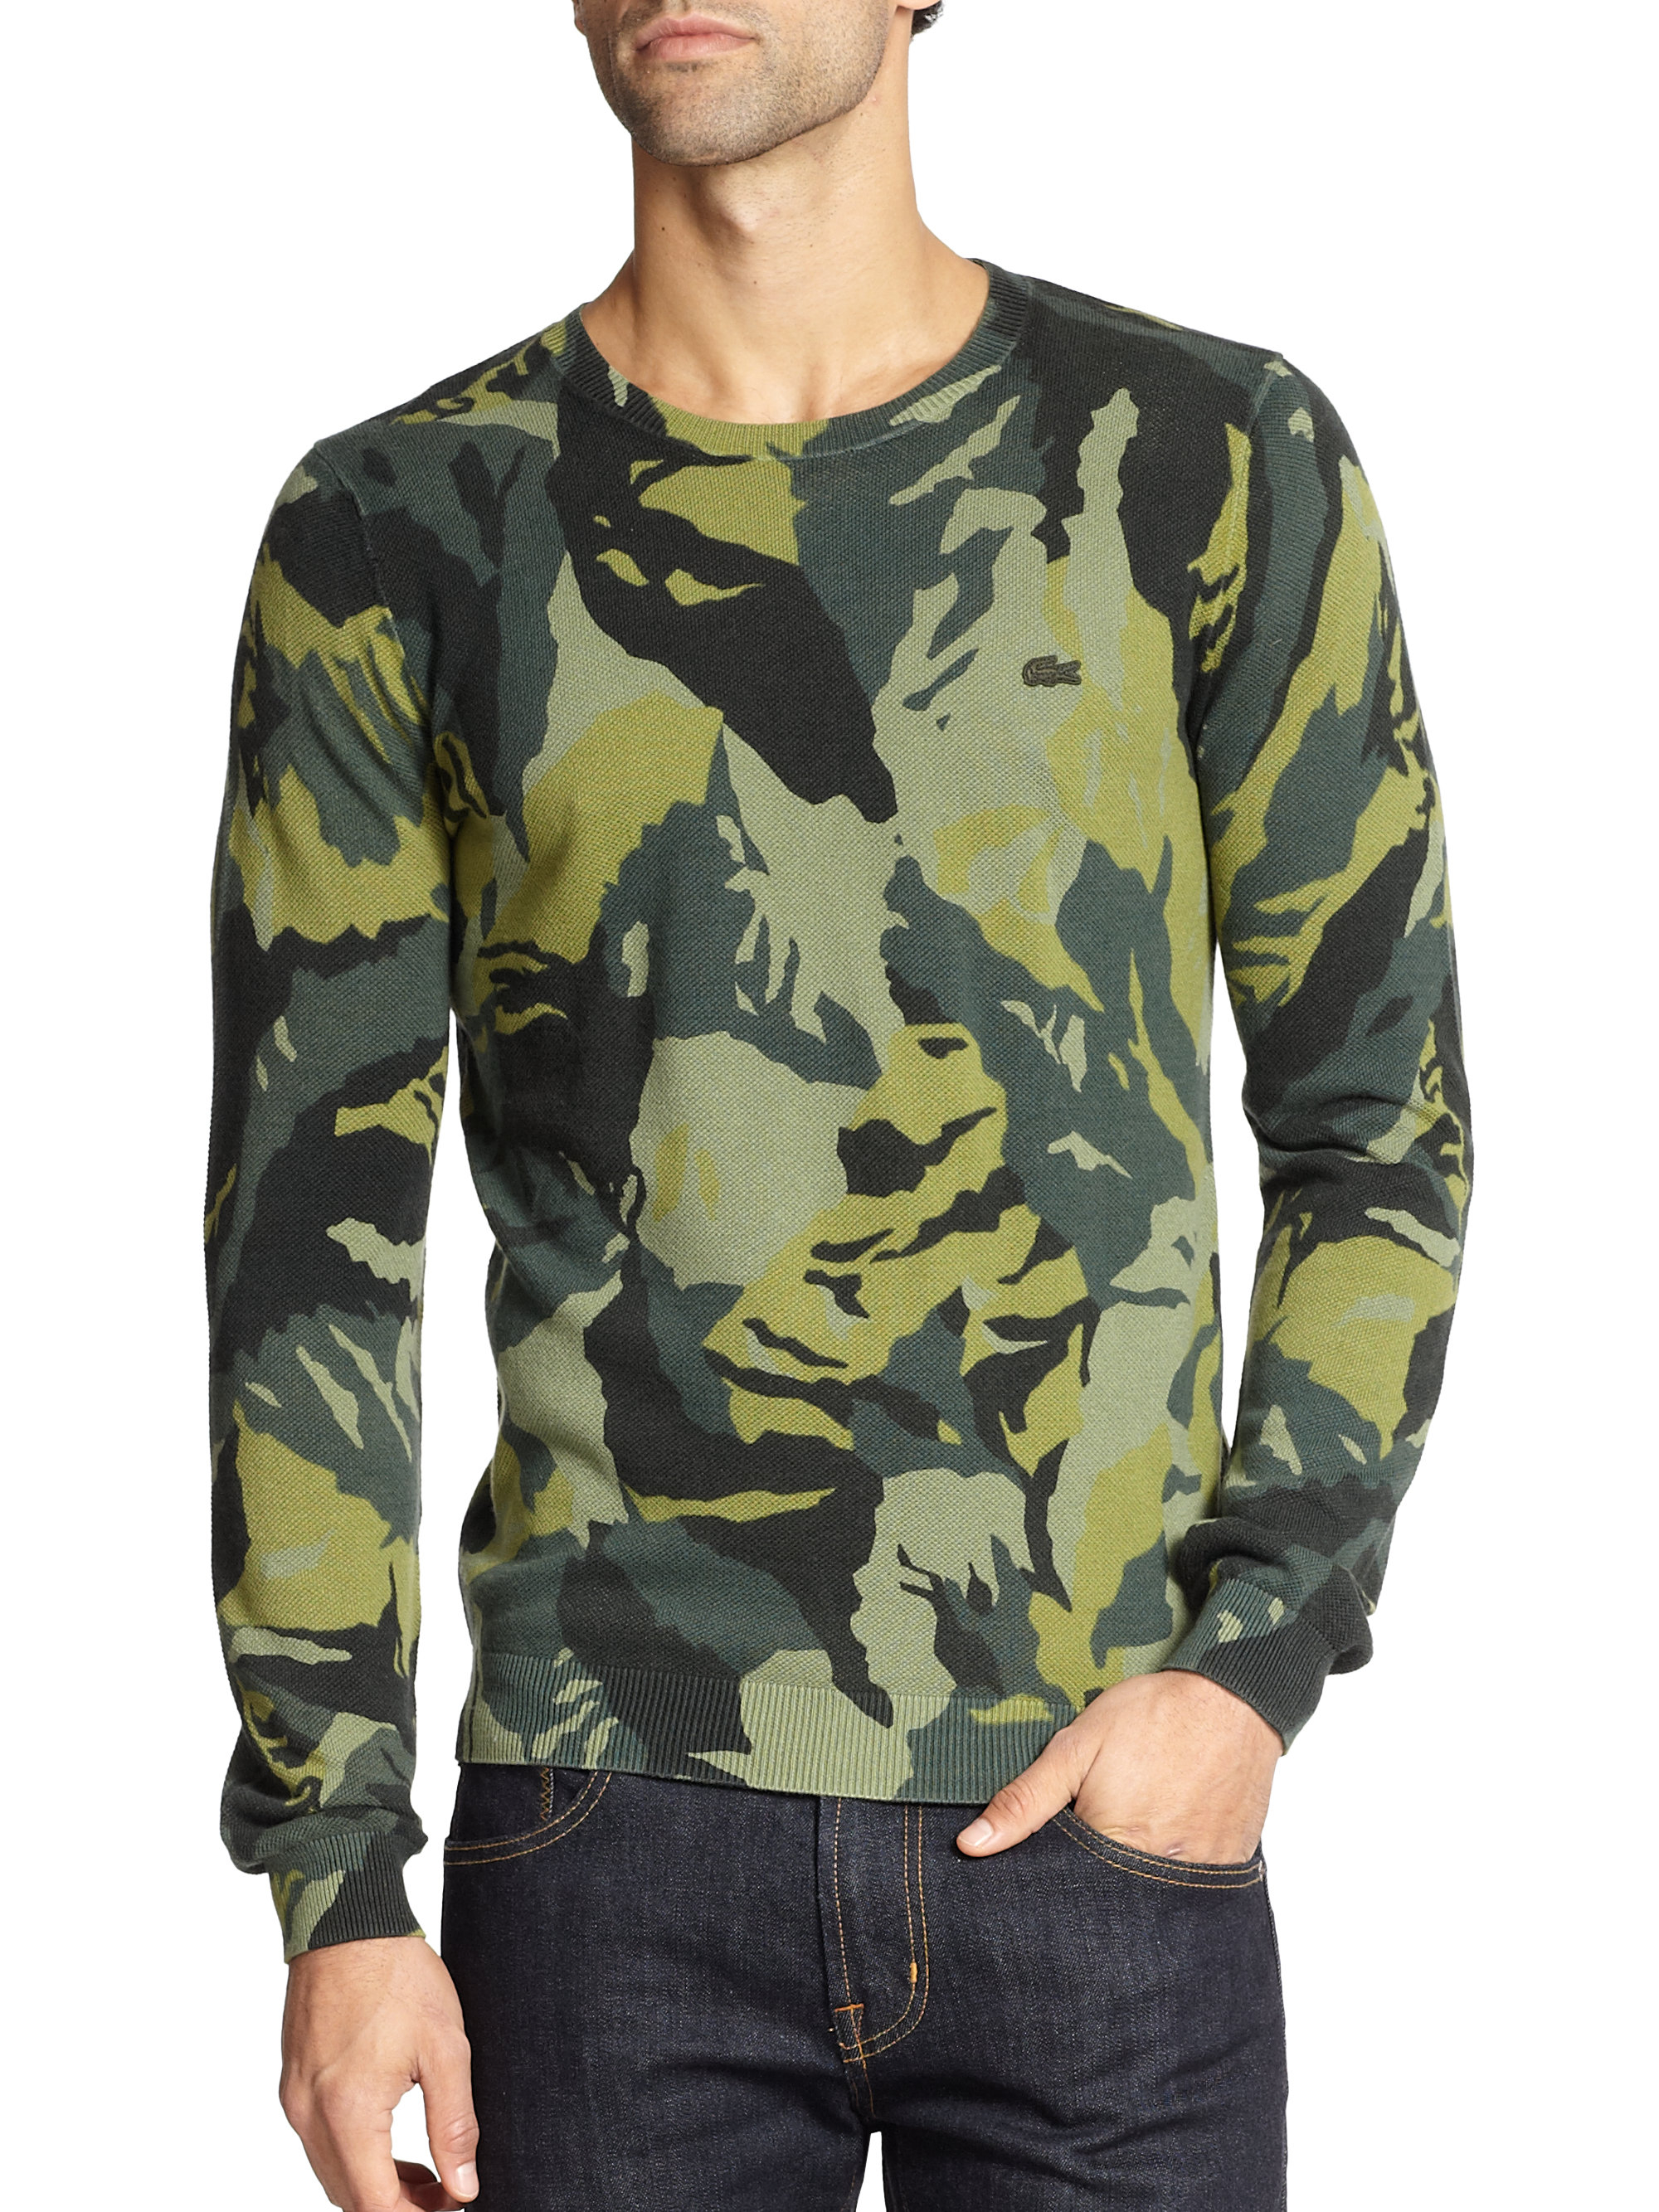 Lacoste Camo-Print Crewneck Sweater in Green for Men - Lyst